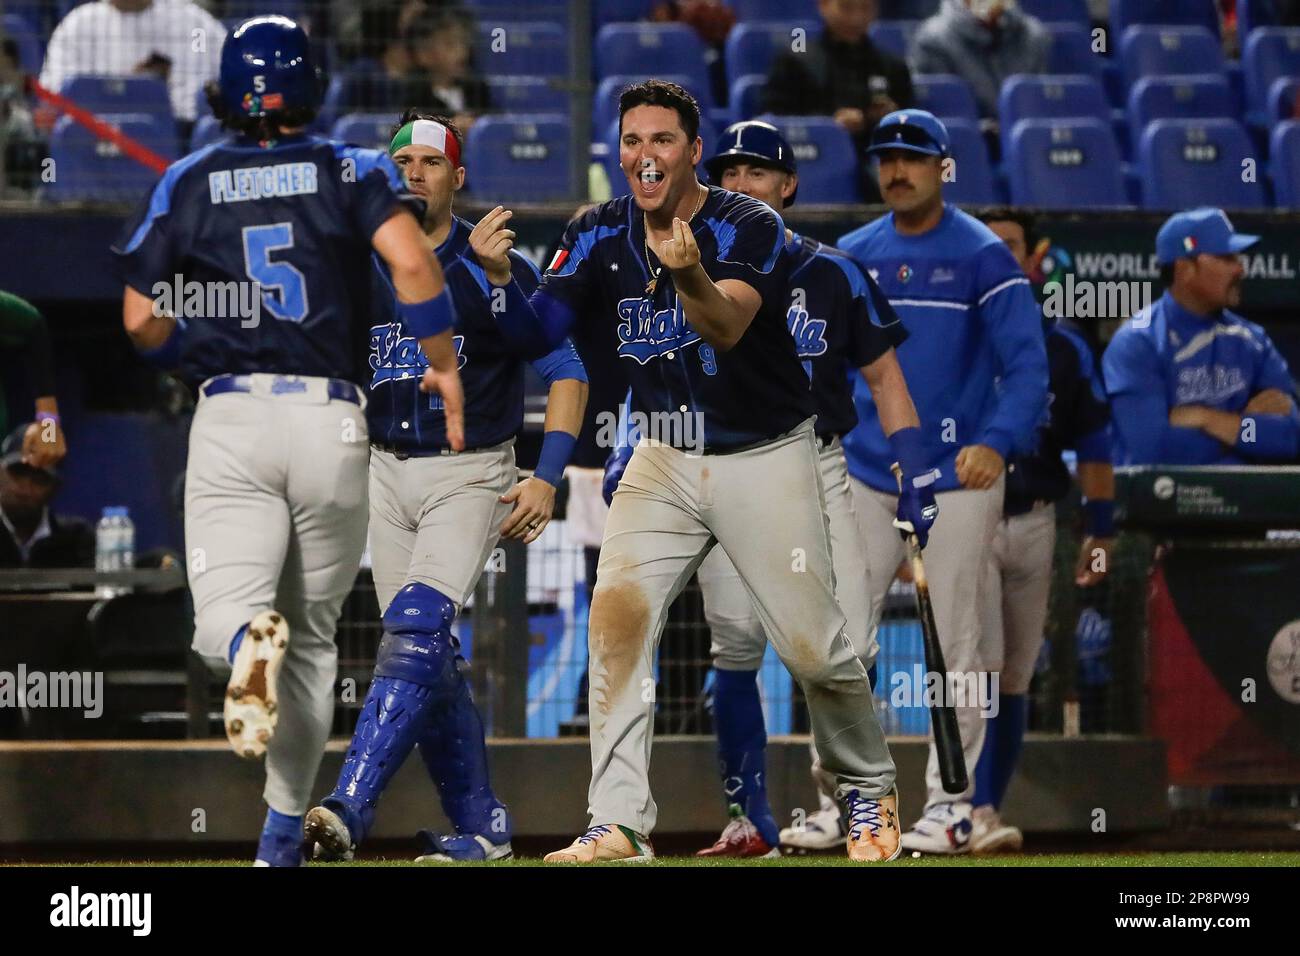 Italy's Vinnie Pasquantino gestures to cheer at his teammate Dominic  Fletcher at left during a Pool A game against Cuba for the World Baseball  Classic (WBC) at the Taichung Intercontinental Baseball Stadium